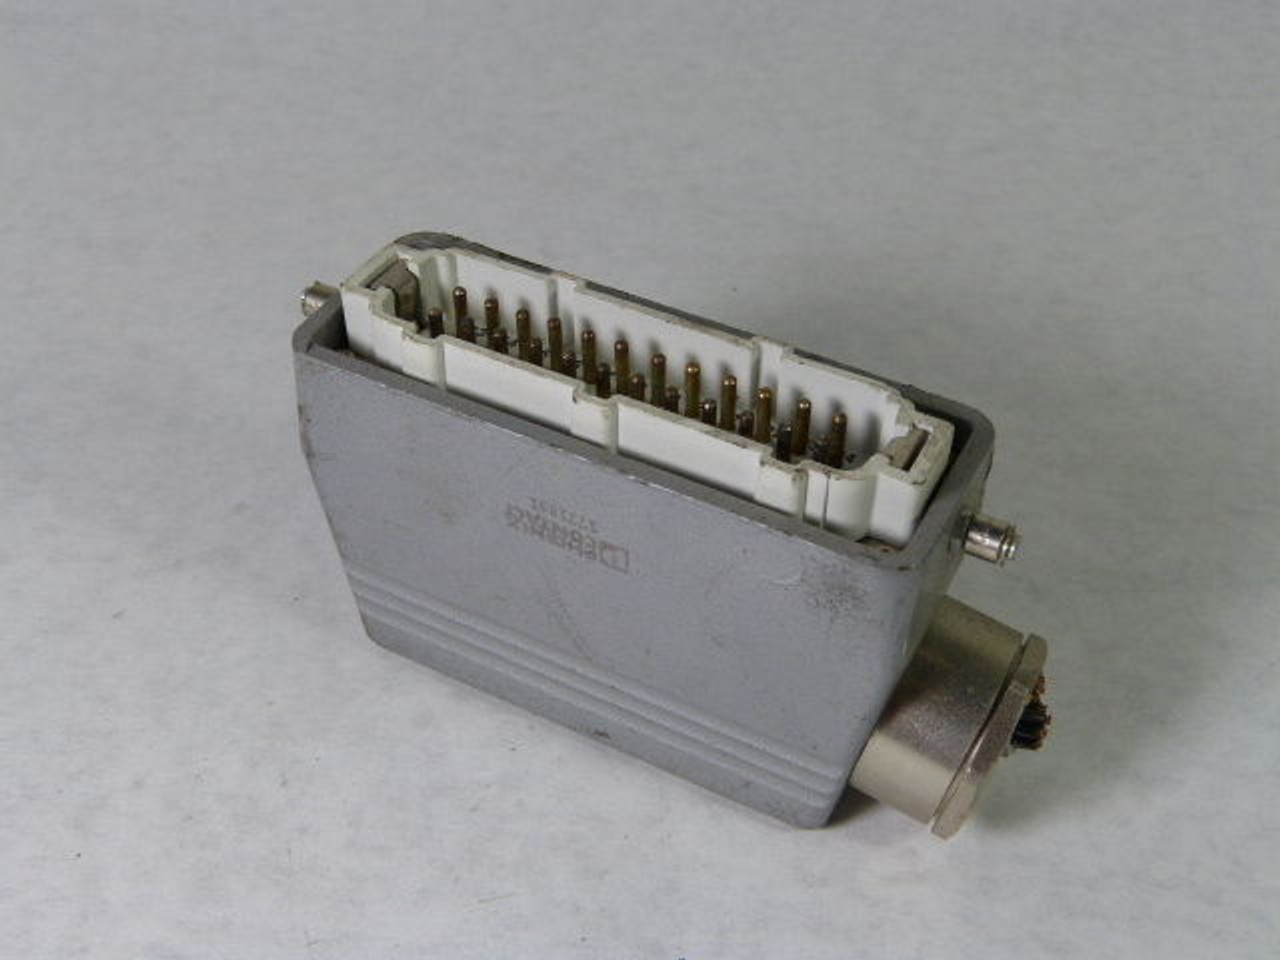 Phoenix Contact 17-71-74-9 Male Plug 16amp 400V With Enclosure USED